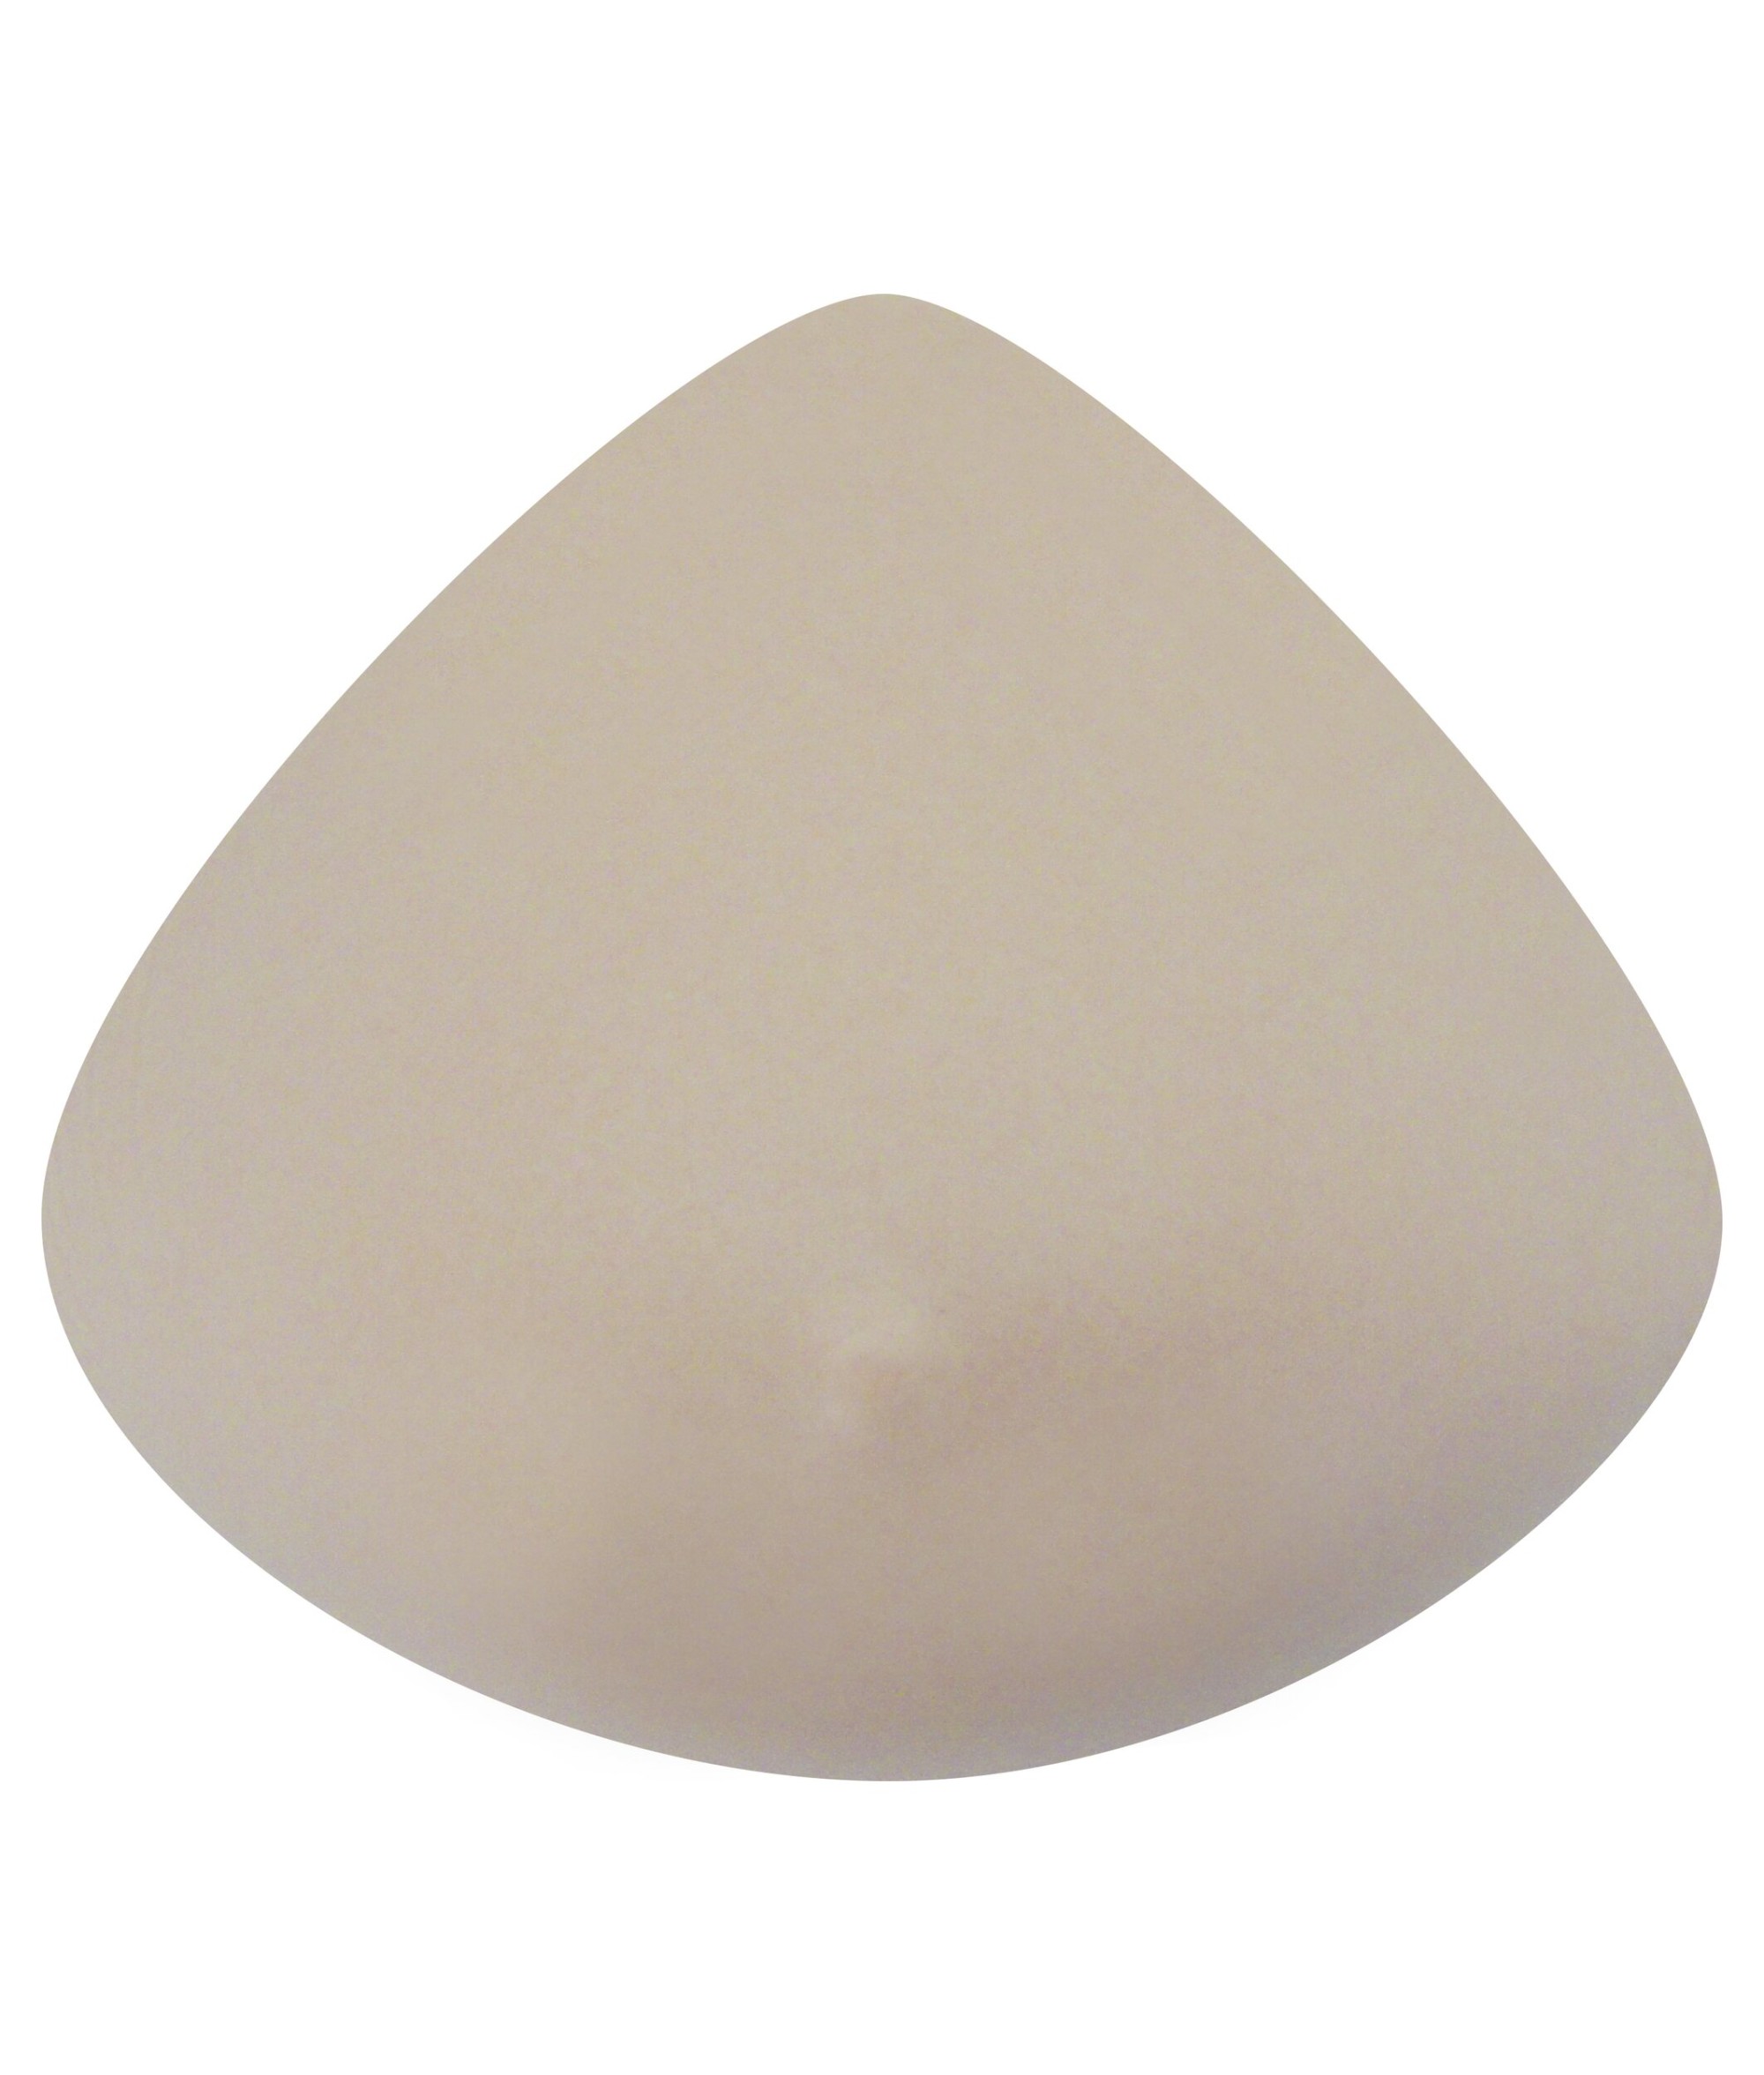 2 Pack Silicone Breast Form Triangle Mastectomy Prosthesis Bra Pad Enhancer